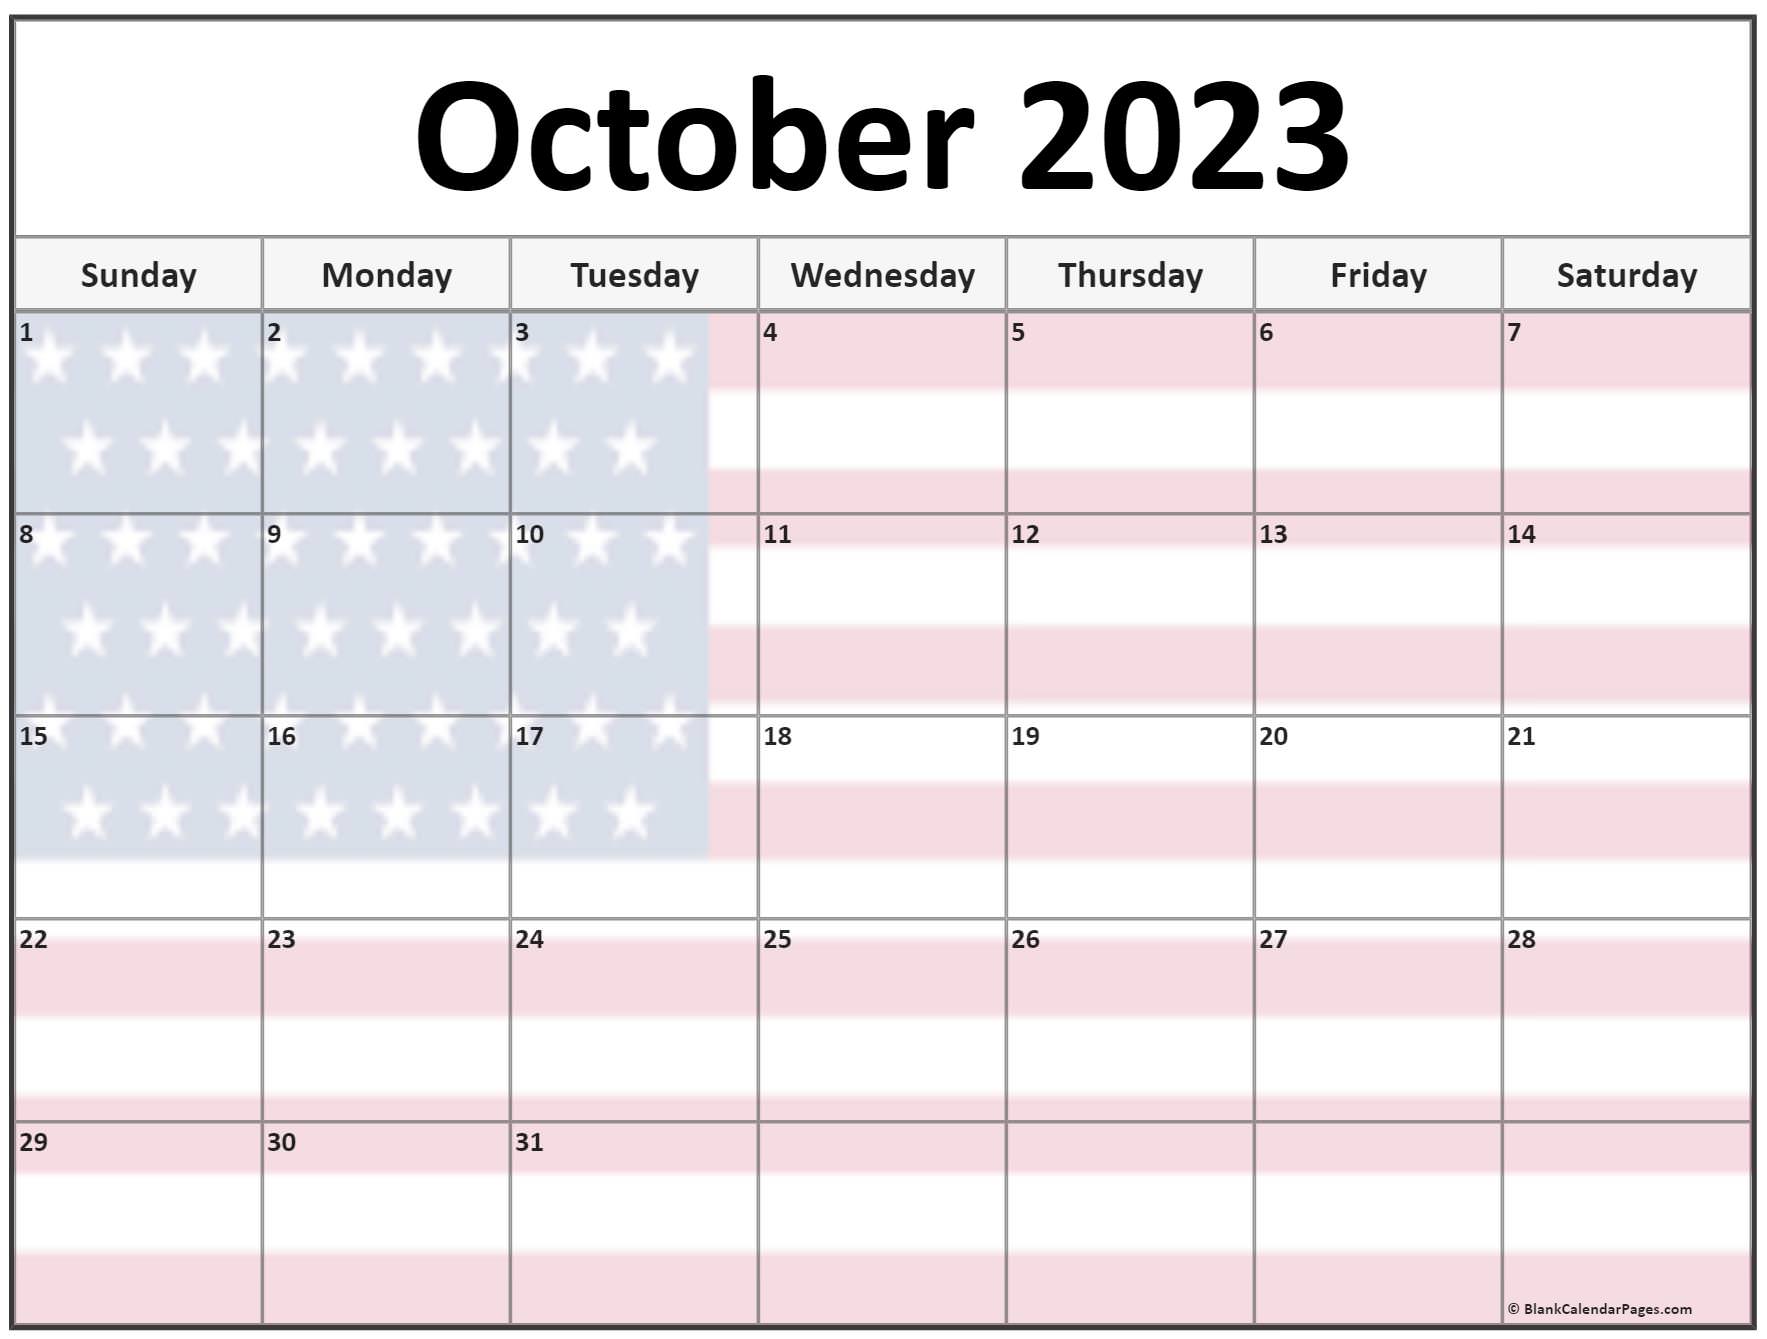 Collection of October 2023 photo calendars with image filters.